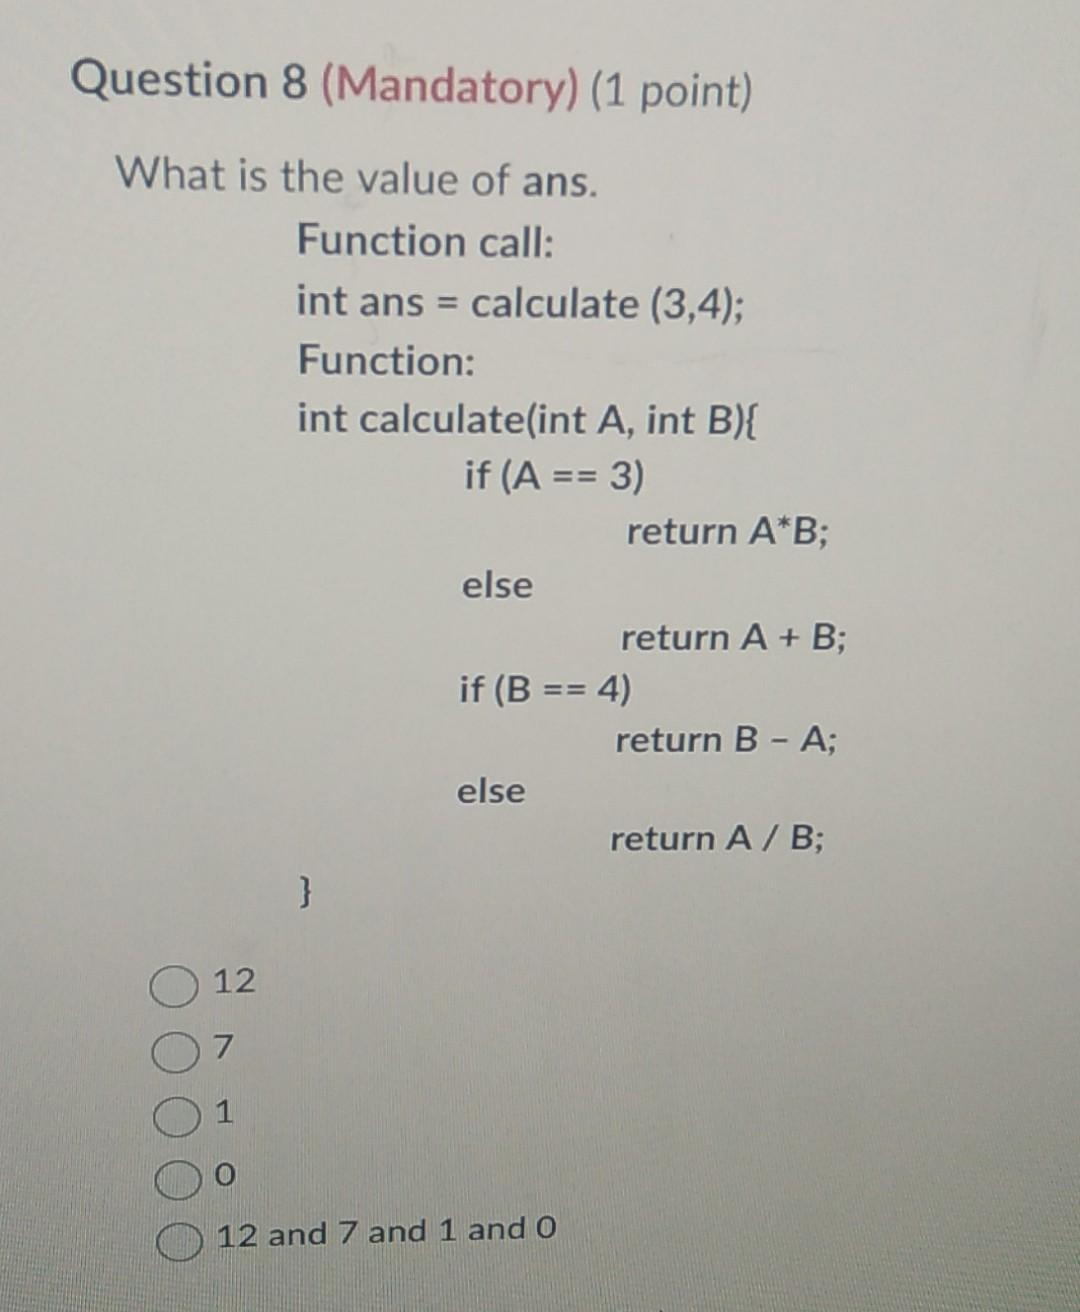 Question 8 (Mandatory) (1 point) What is the value of ans. Function call: int ans ( = ) calculate ( (3,4) ); Function: in